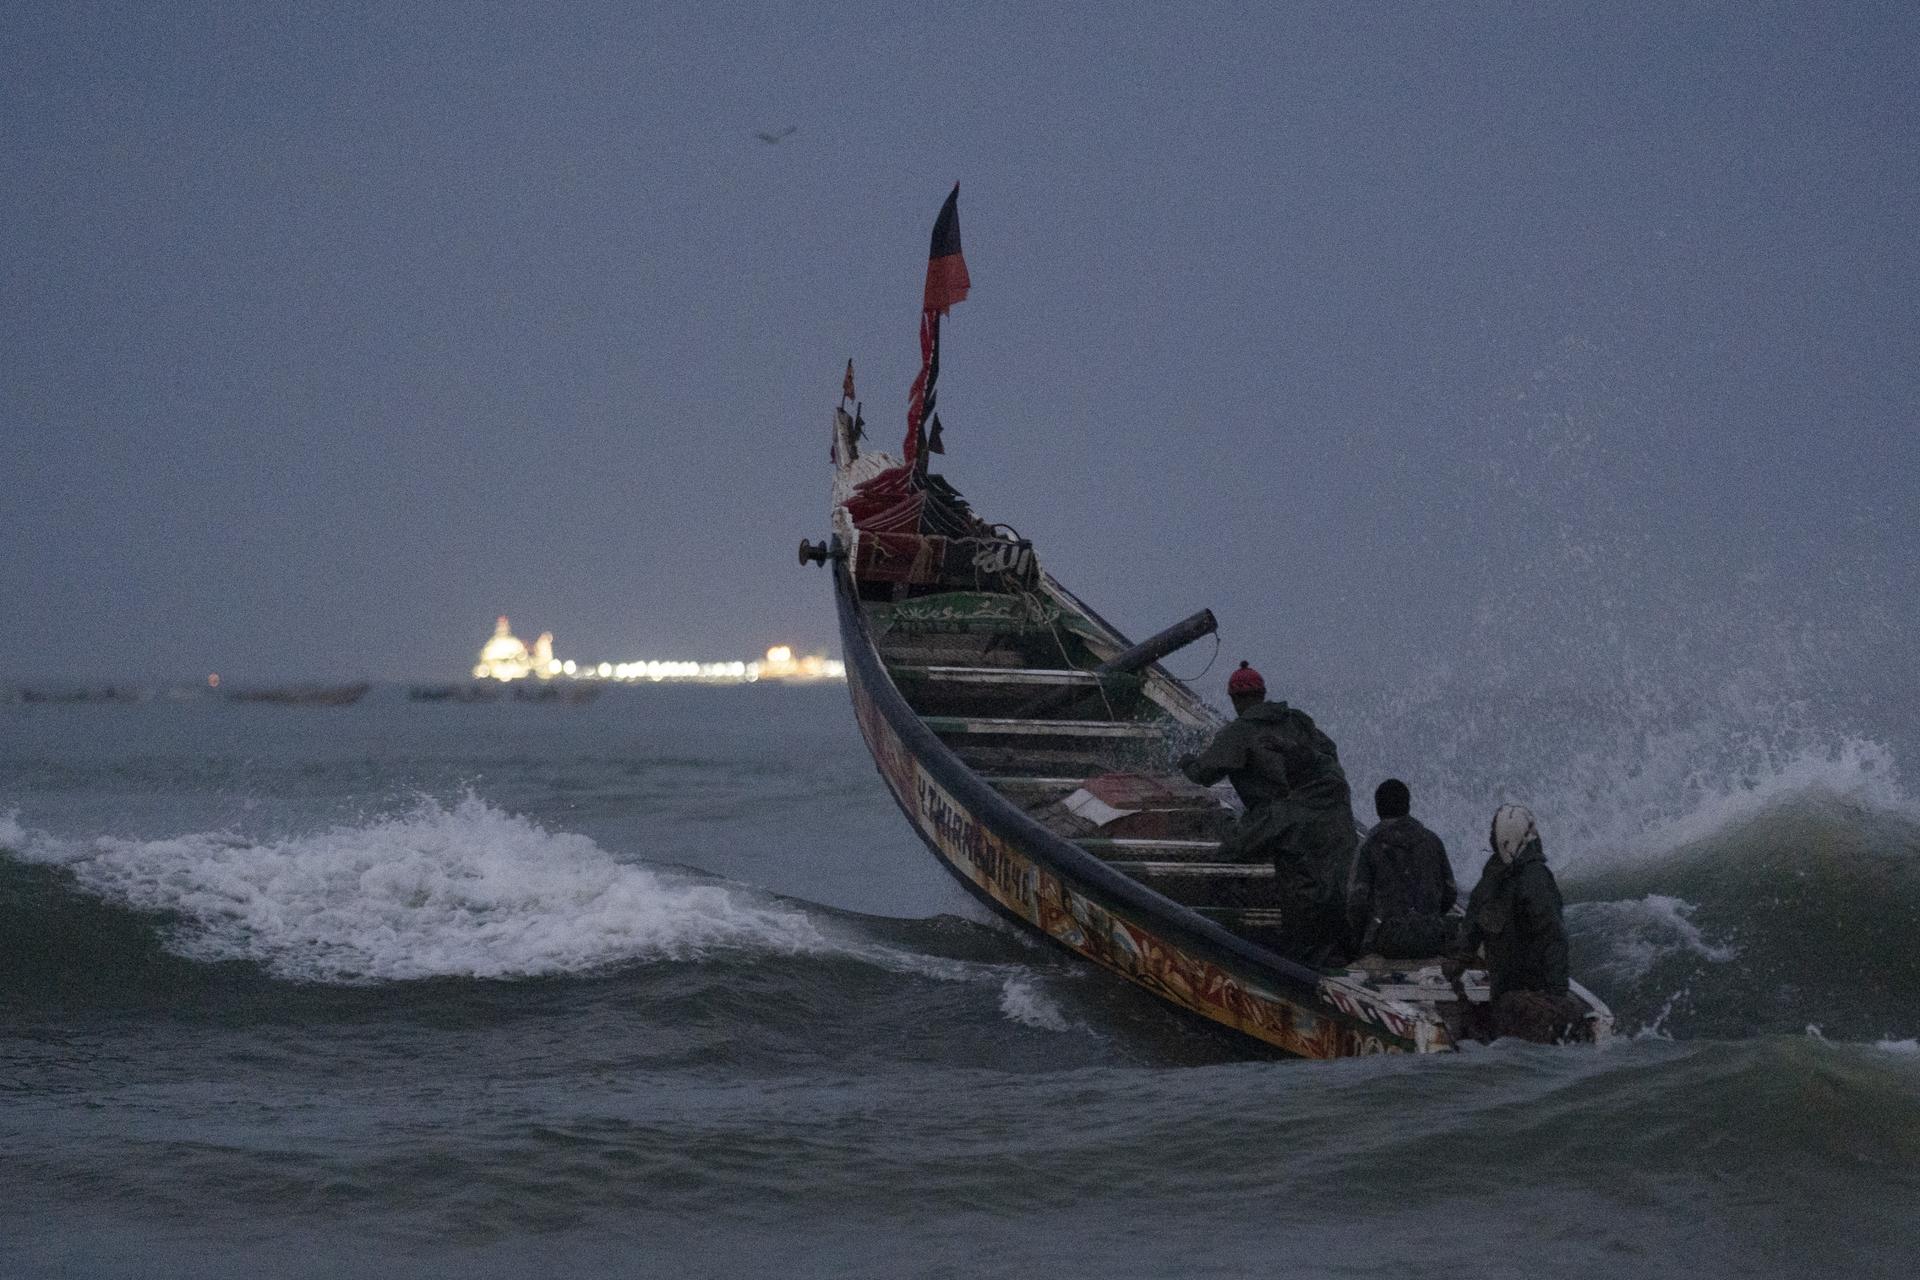 Fishermen on a traditional boat known as pirogue leap over a wave heading out to the Atlantic Ocean as an offshore gas terminal is seen at the horizon in Saint-Louis, Senegal, Jan. 18, 2023.